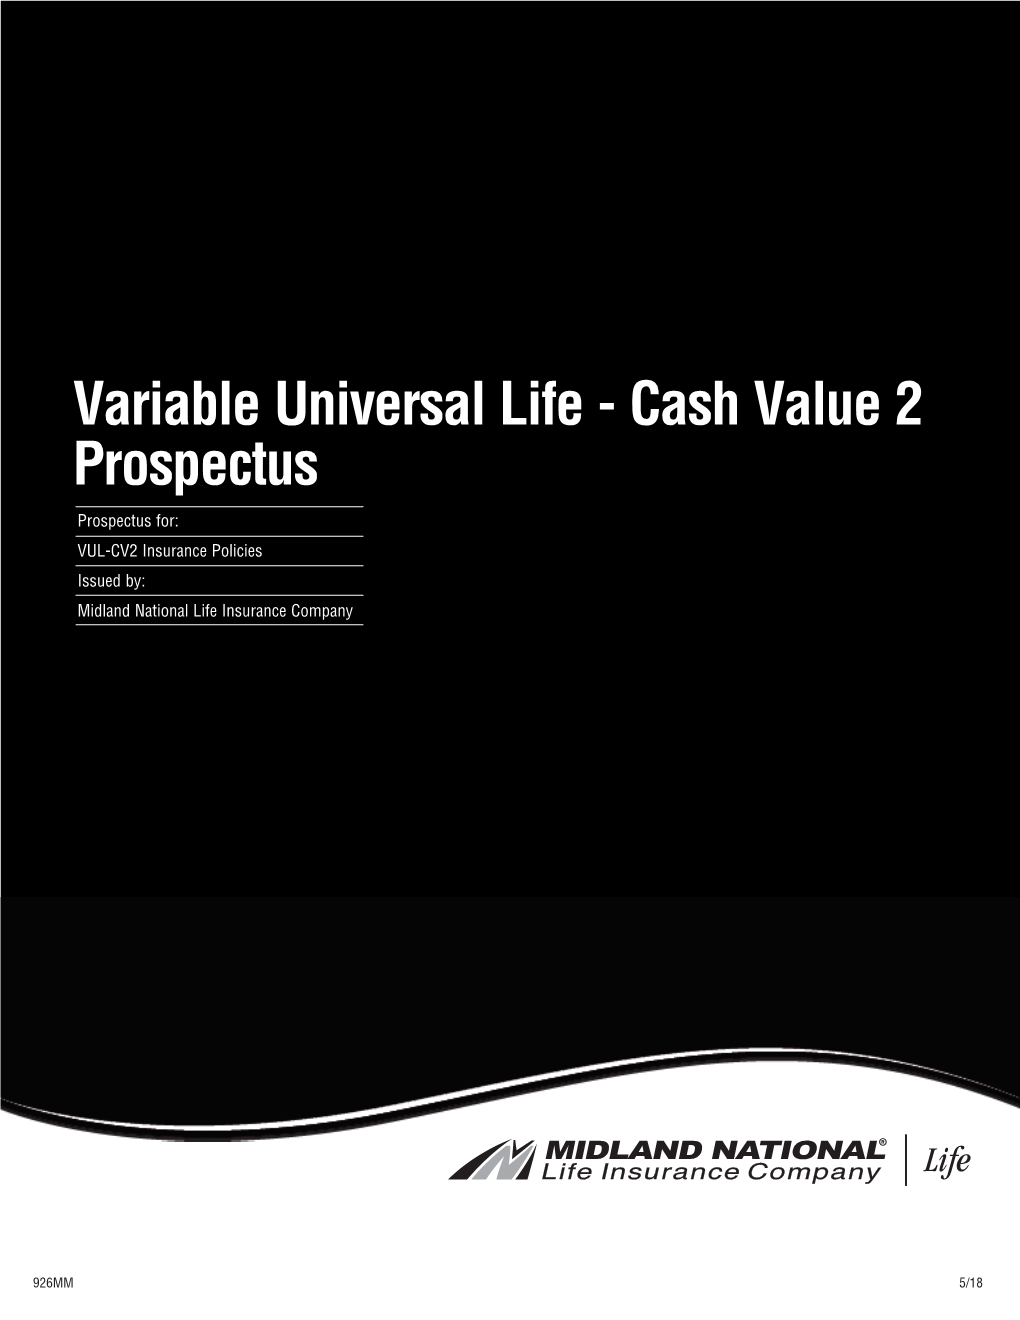 Variable Universal Life - Cash Value 2 Prospectus Prospectus For: VUL-CV2 Insurance Policies Issued By: Midland National Life Insurance Company